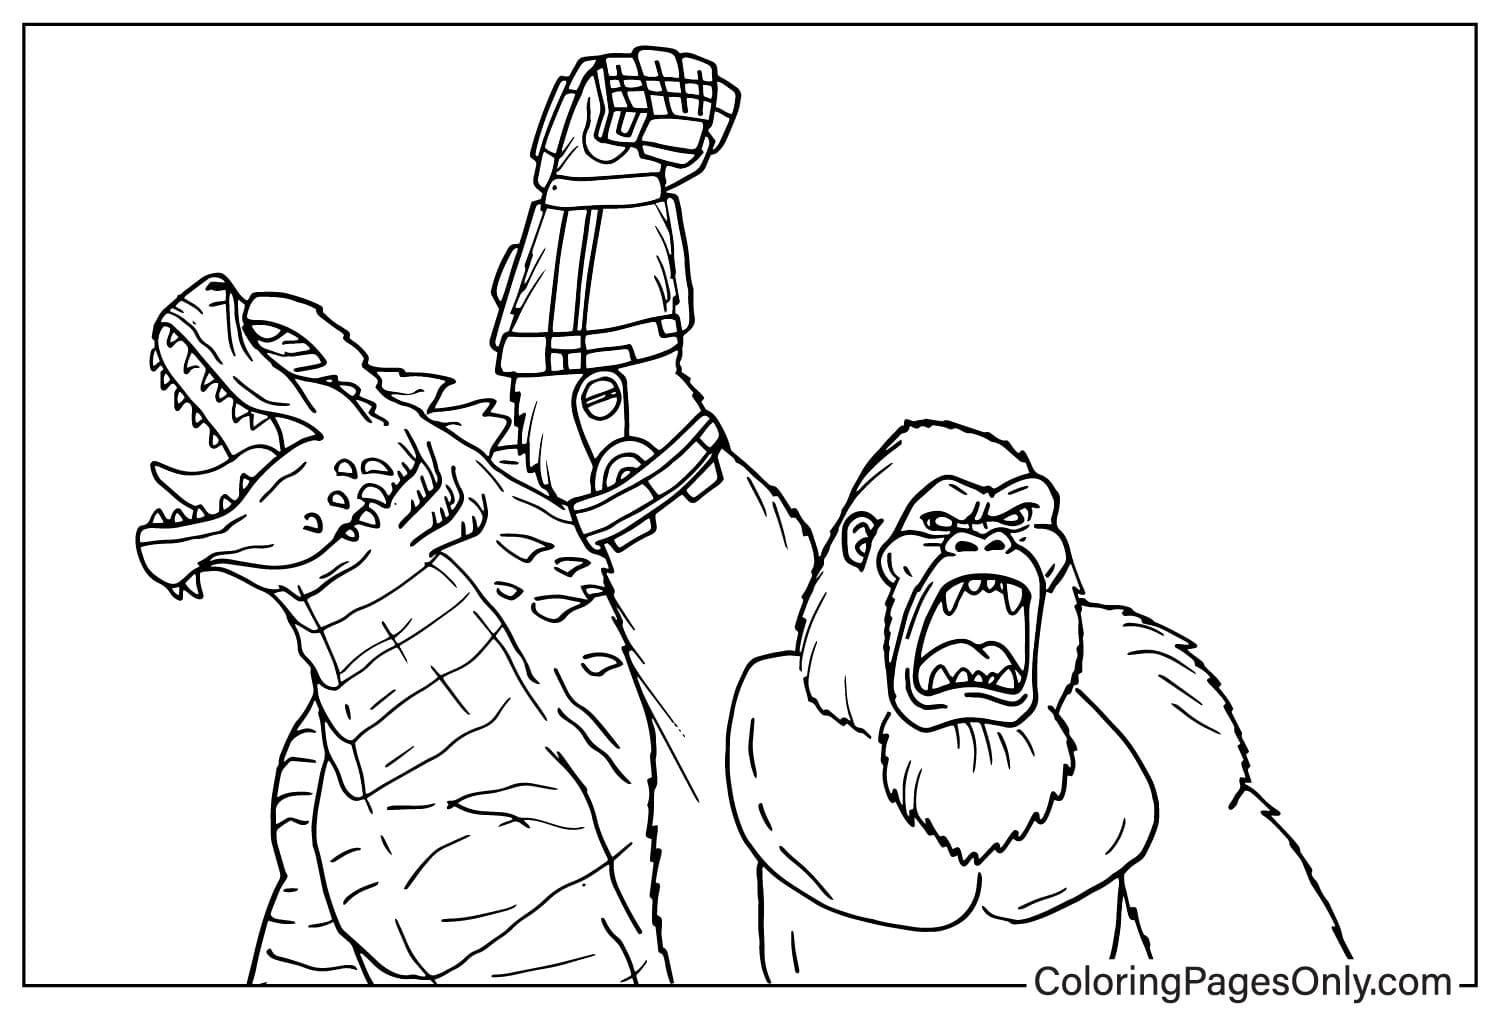 Godzilla x Kong- The New Empire Pictures to Color from Godzilla x Kong: The New Empire